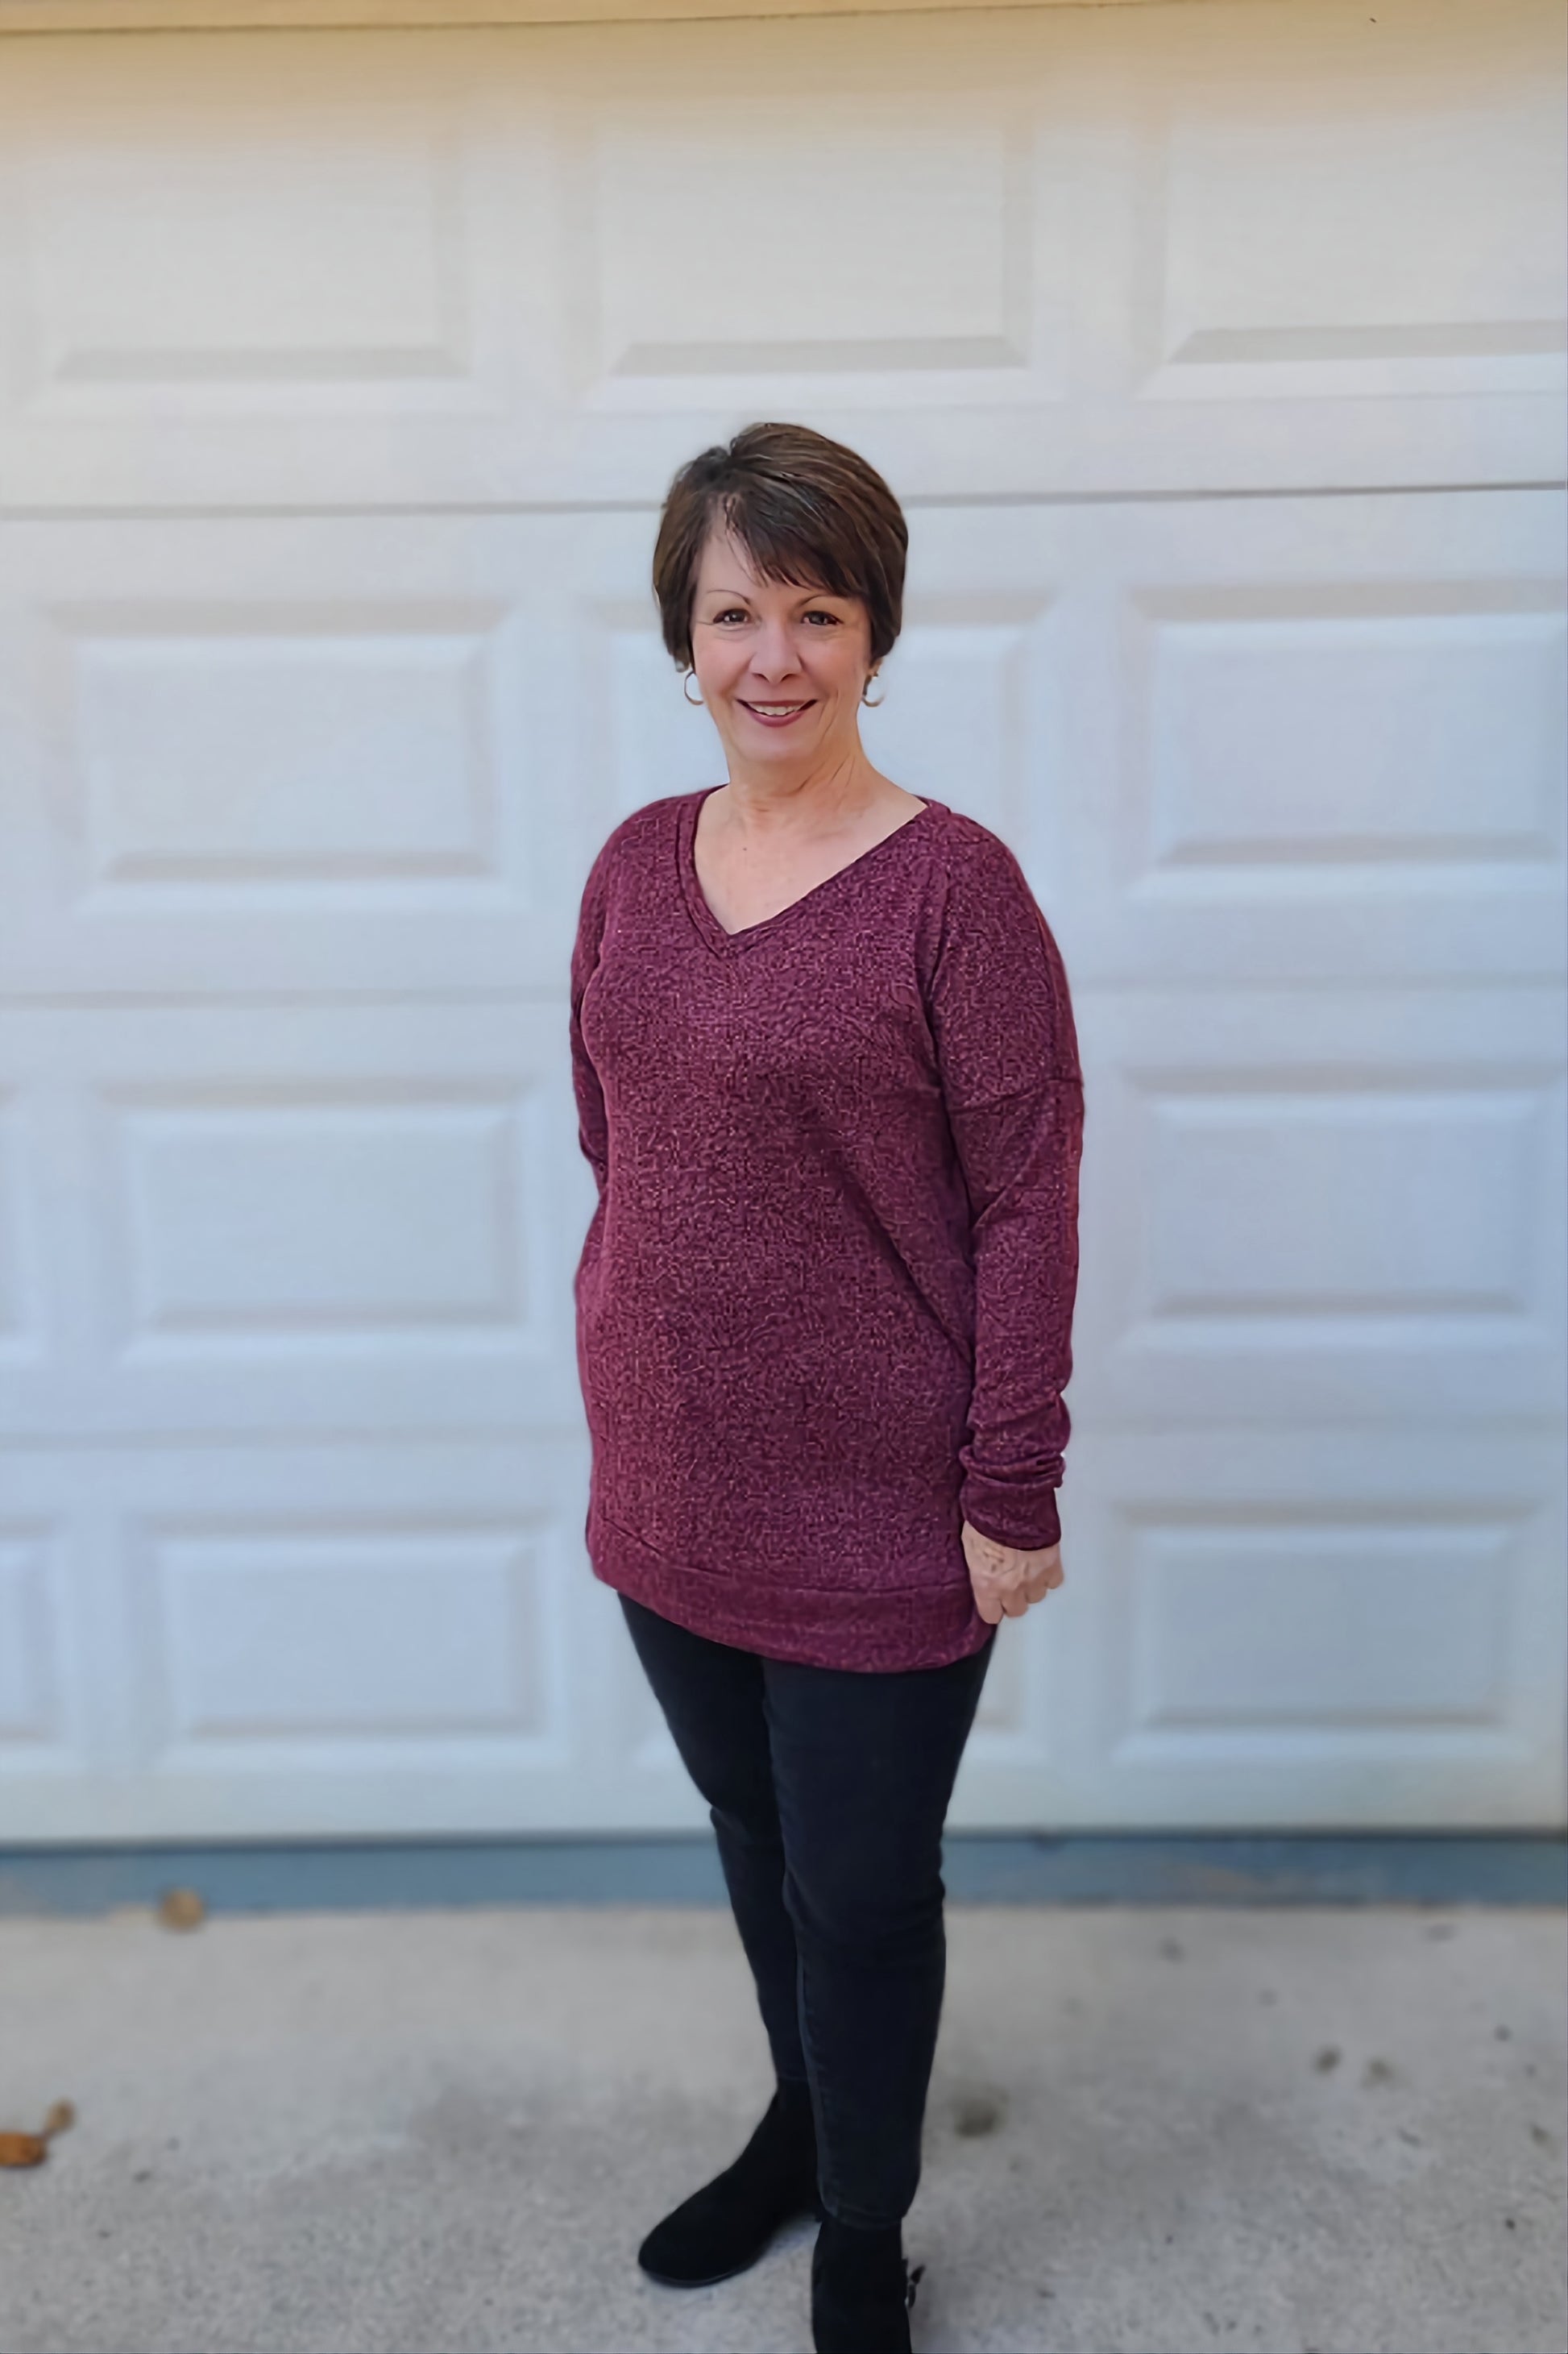 Welcome fall effortlessly in this tunic top! It features a v-cut neckline, side pockets, waistband with slits on each side, and it is so soft and comfortable!